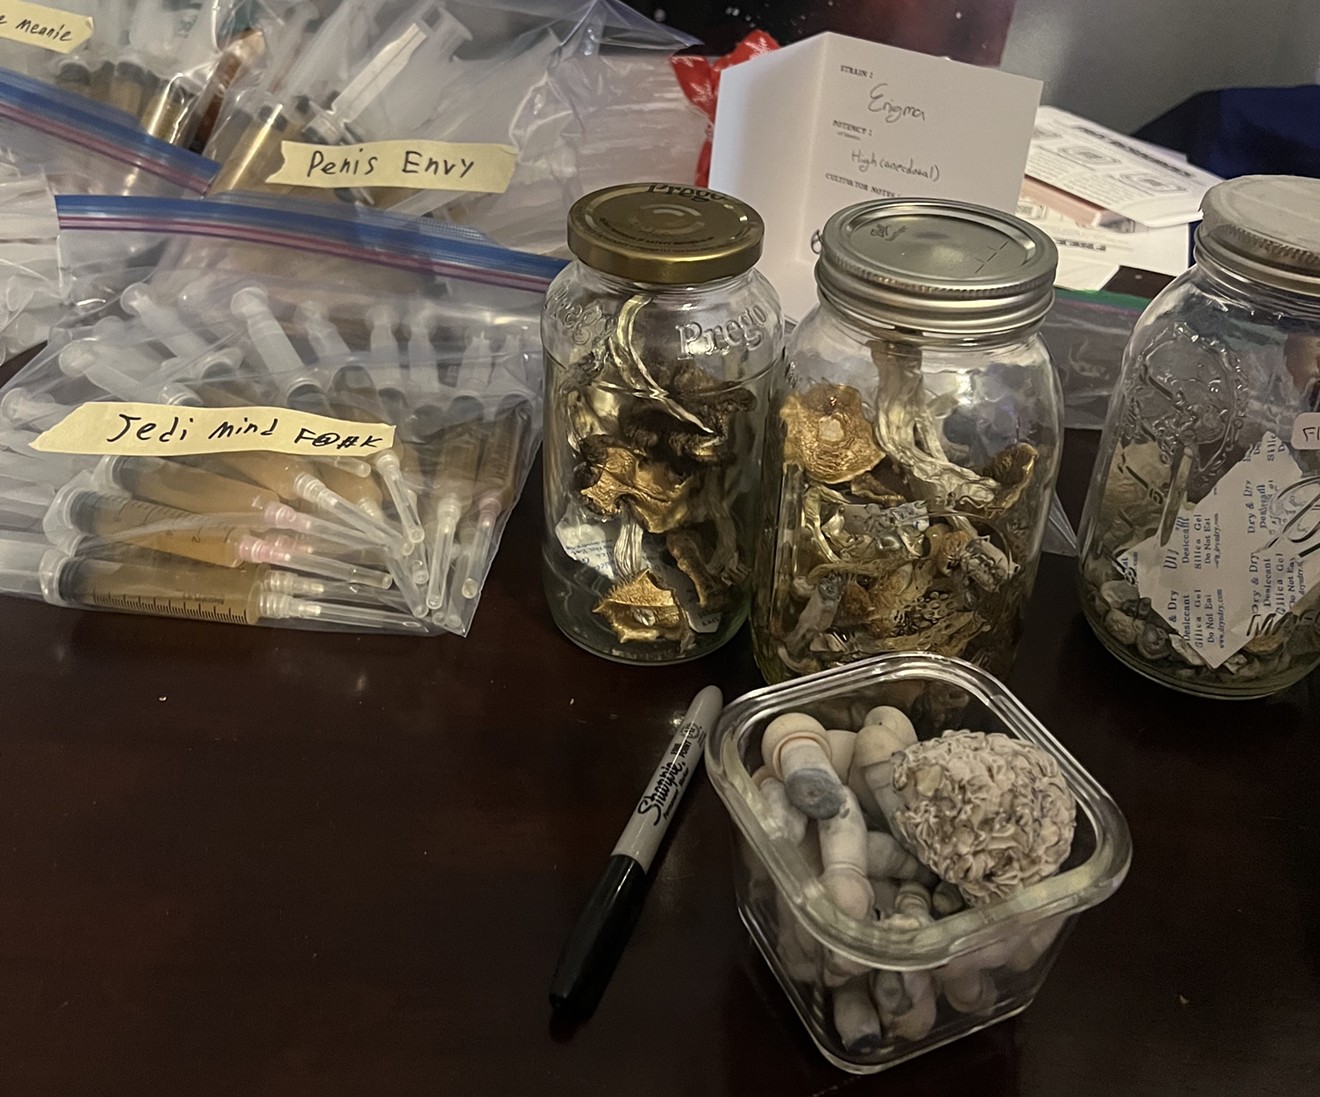 The Denver Mushroom Cooperative's Gifting Portal event facilitated the gifting and trading of psilocybin mushrooms, spores and more on Thursday, December 21.